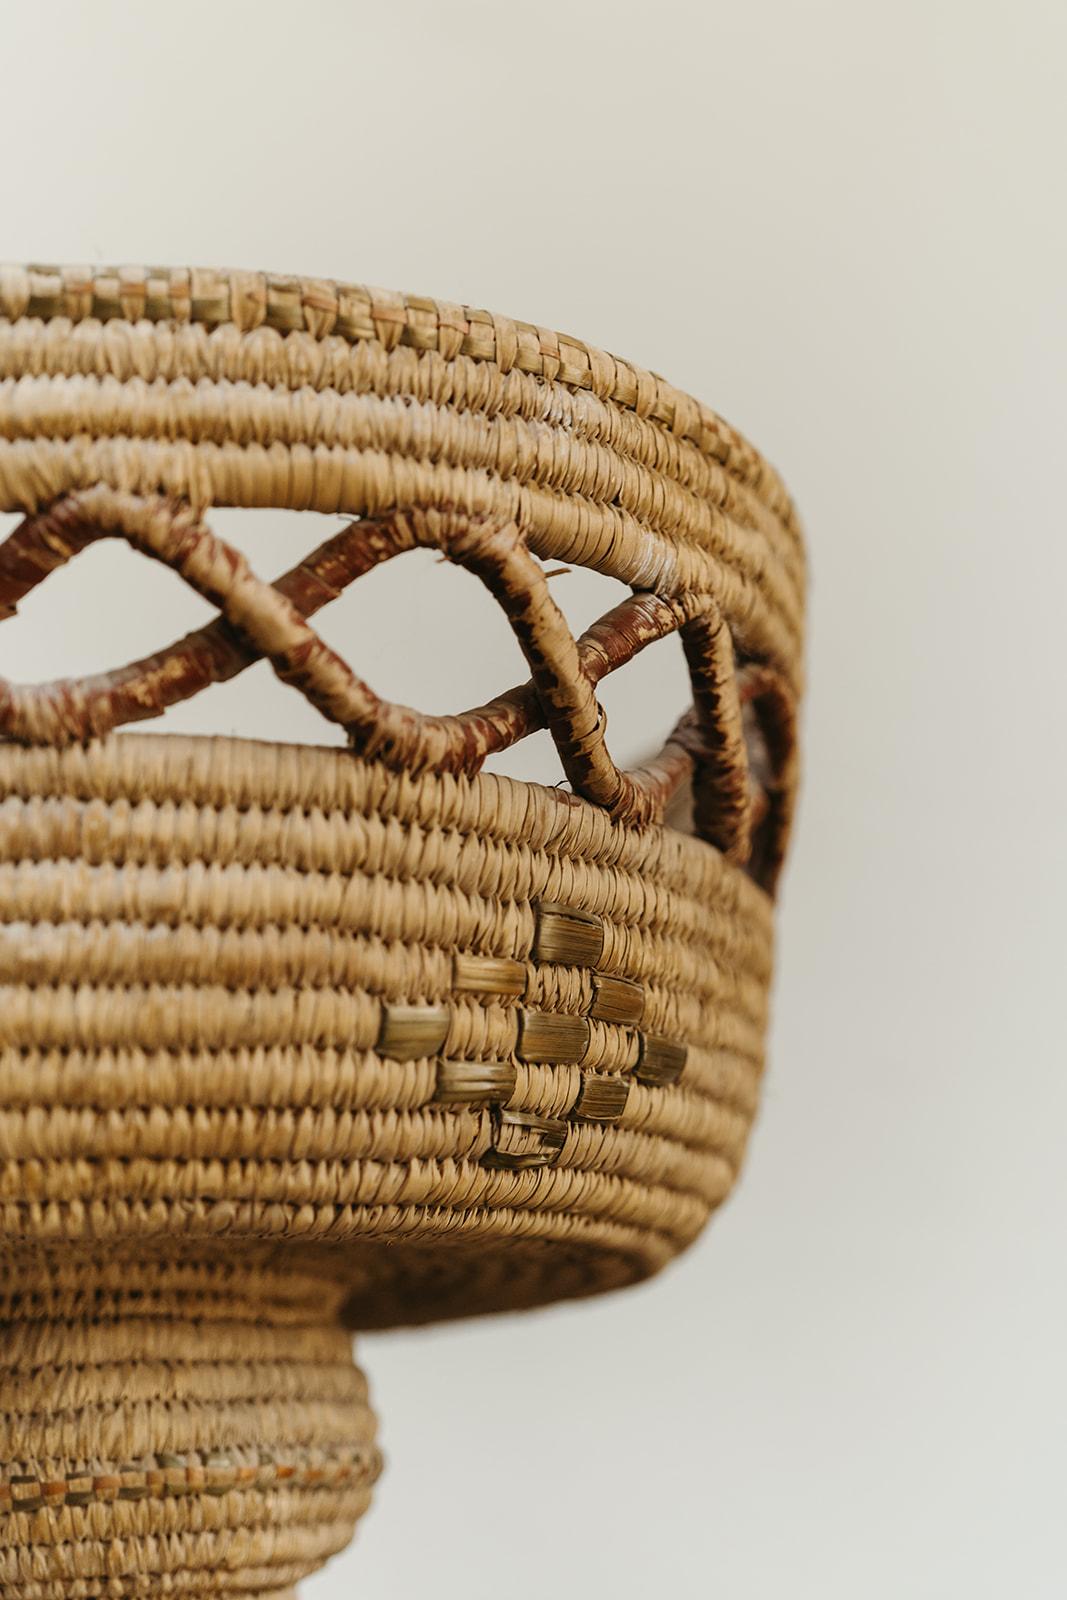 Wicker mid 20th century large wicker bowl ... For Sale